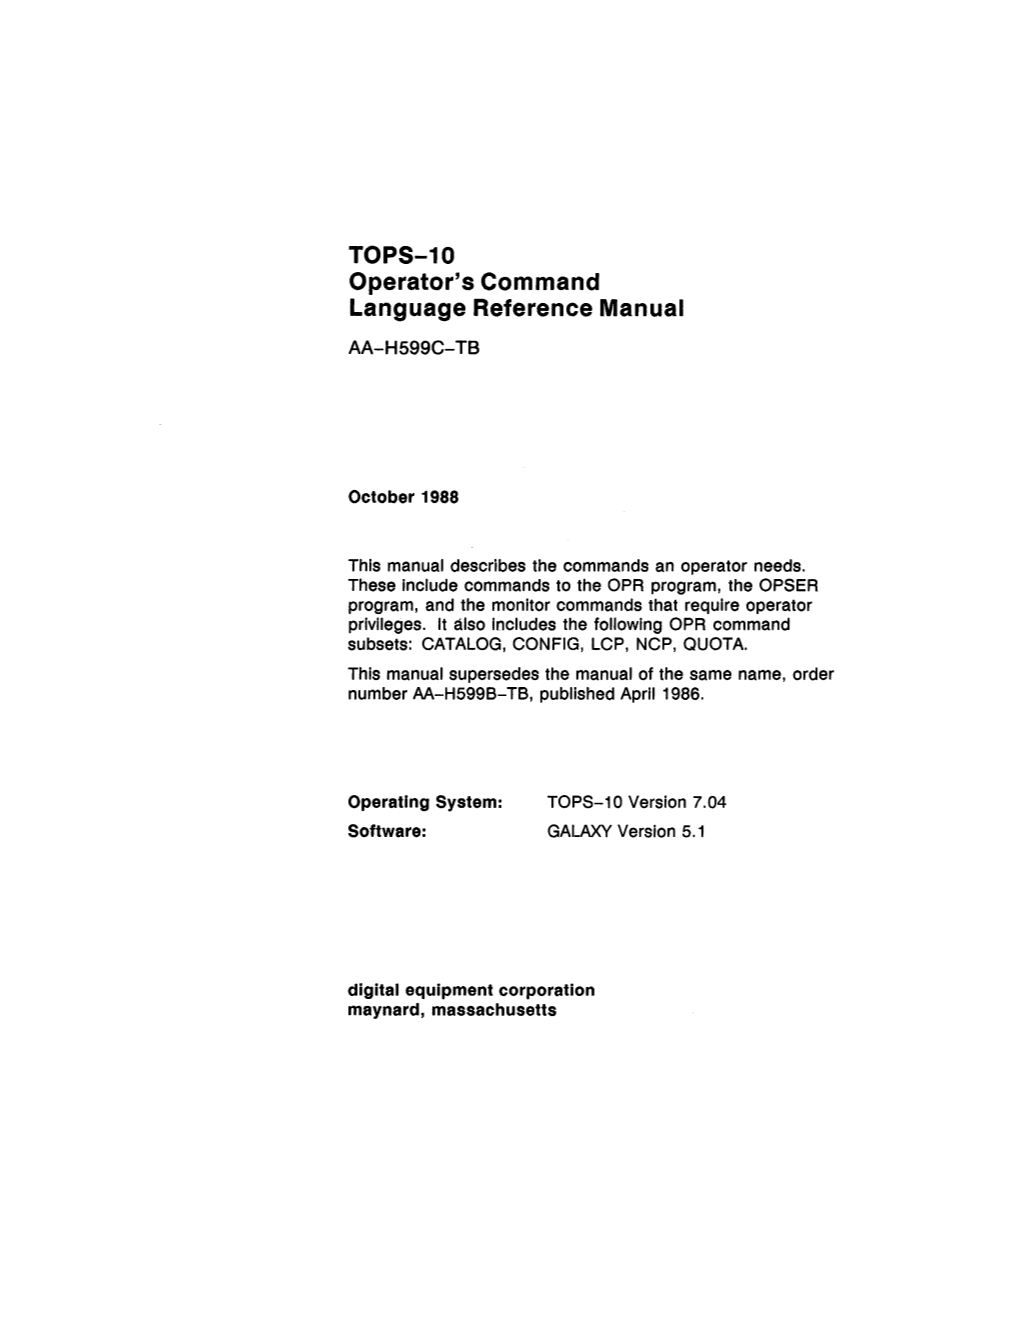 TOPS-10 Operator's Command Language Reference Manual AA-H599C-TB